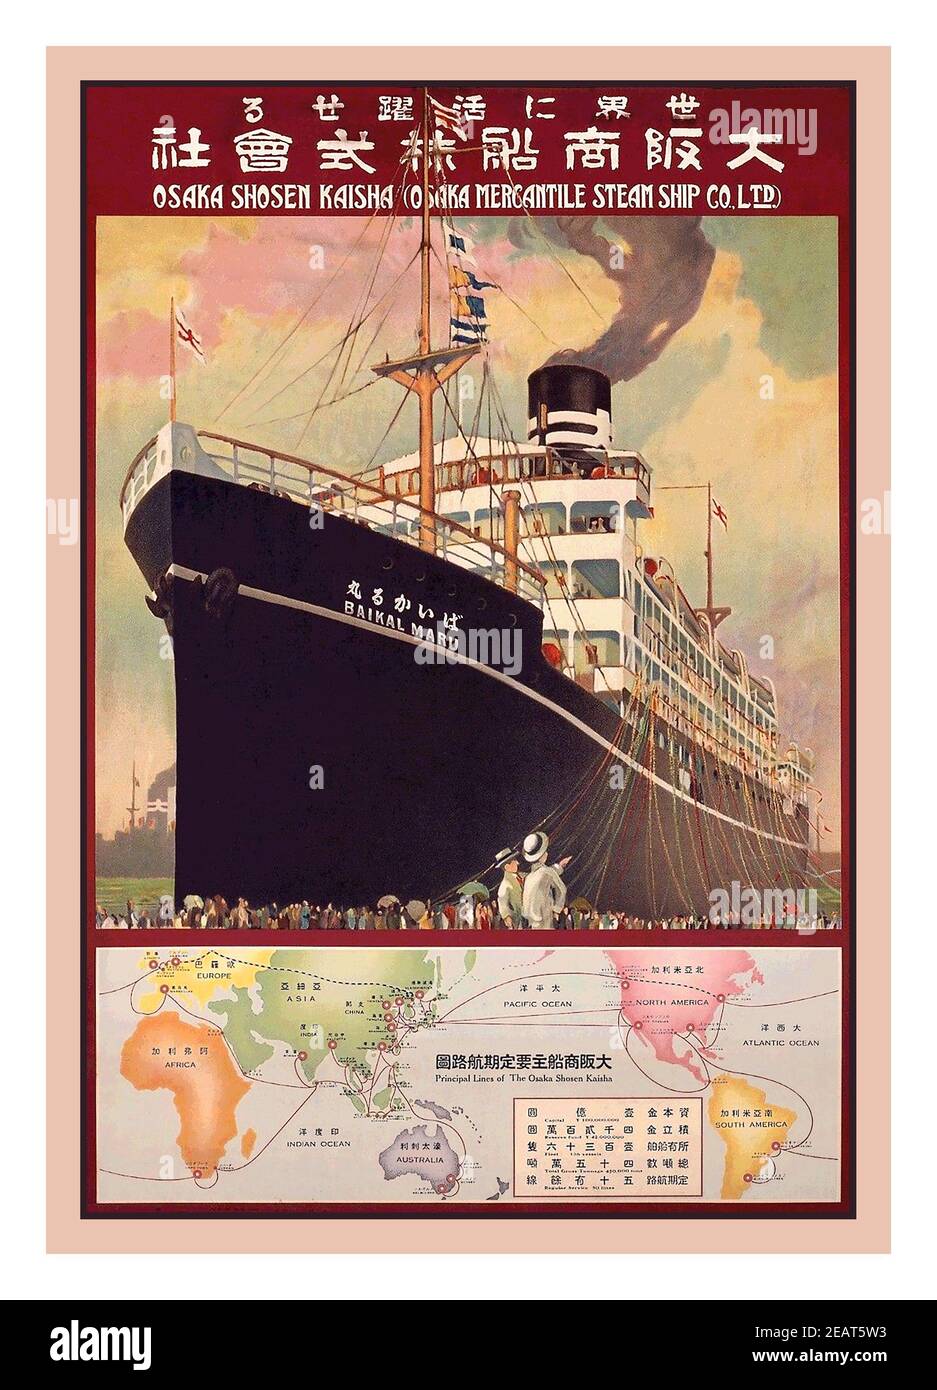 Vintage 1900's Japanese Ocean Liner 'SS Baikal Maru' Poster. Osaka Shosen Kaisha. Mercantile Steamship Co. Ltd  Advertisement poster. Steamship.BAIKAL MARU was completed in 1921 as a passenger cargo ship for the Osaka Shosen K. K. (OSK) Line, Osaka. In '28, she was chartered by the IJA as a troop transport. In '37, she was converted to a hospital ship, and in '44 back to a transport. In May '45, she ran aground off Himeshima. BAIKAL MARU survived the war and was converted to a whaling factory ship. In '68. she was finally scrapped. Stock Photo